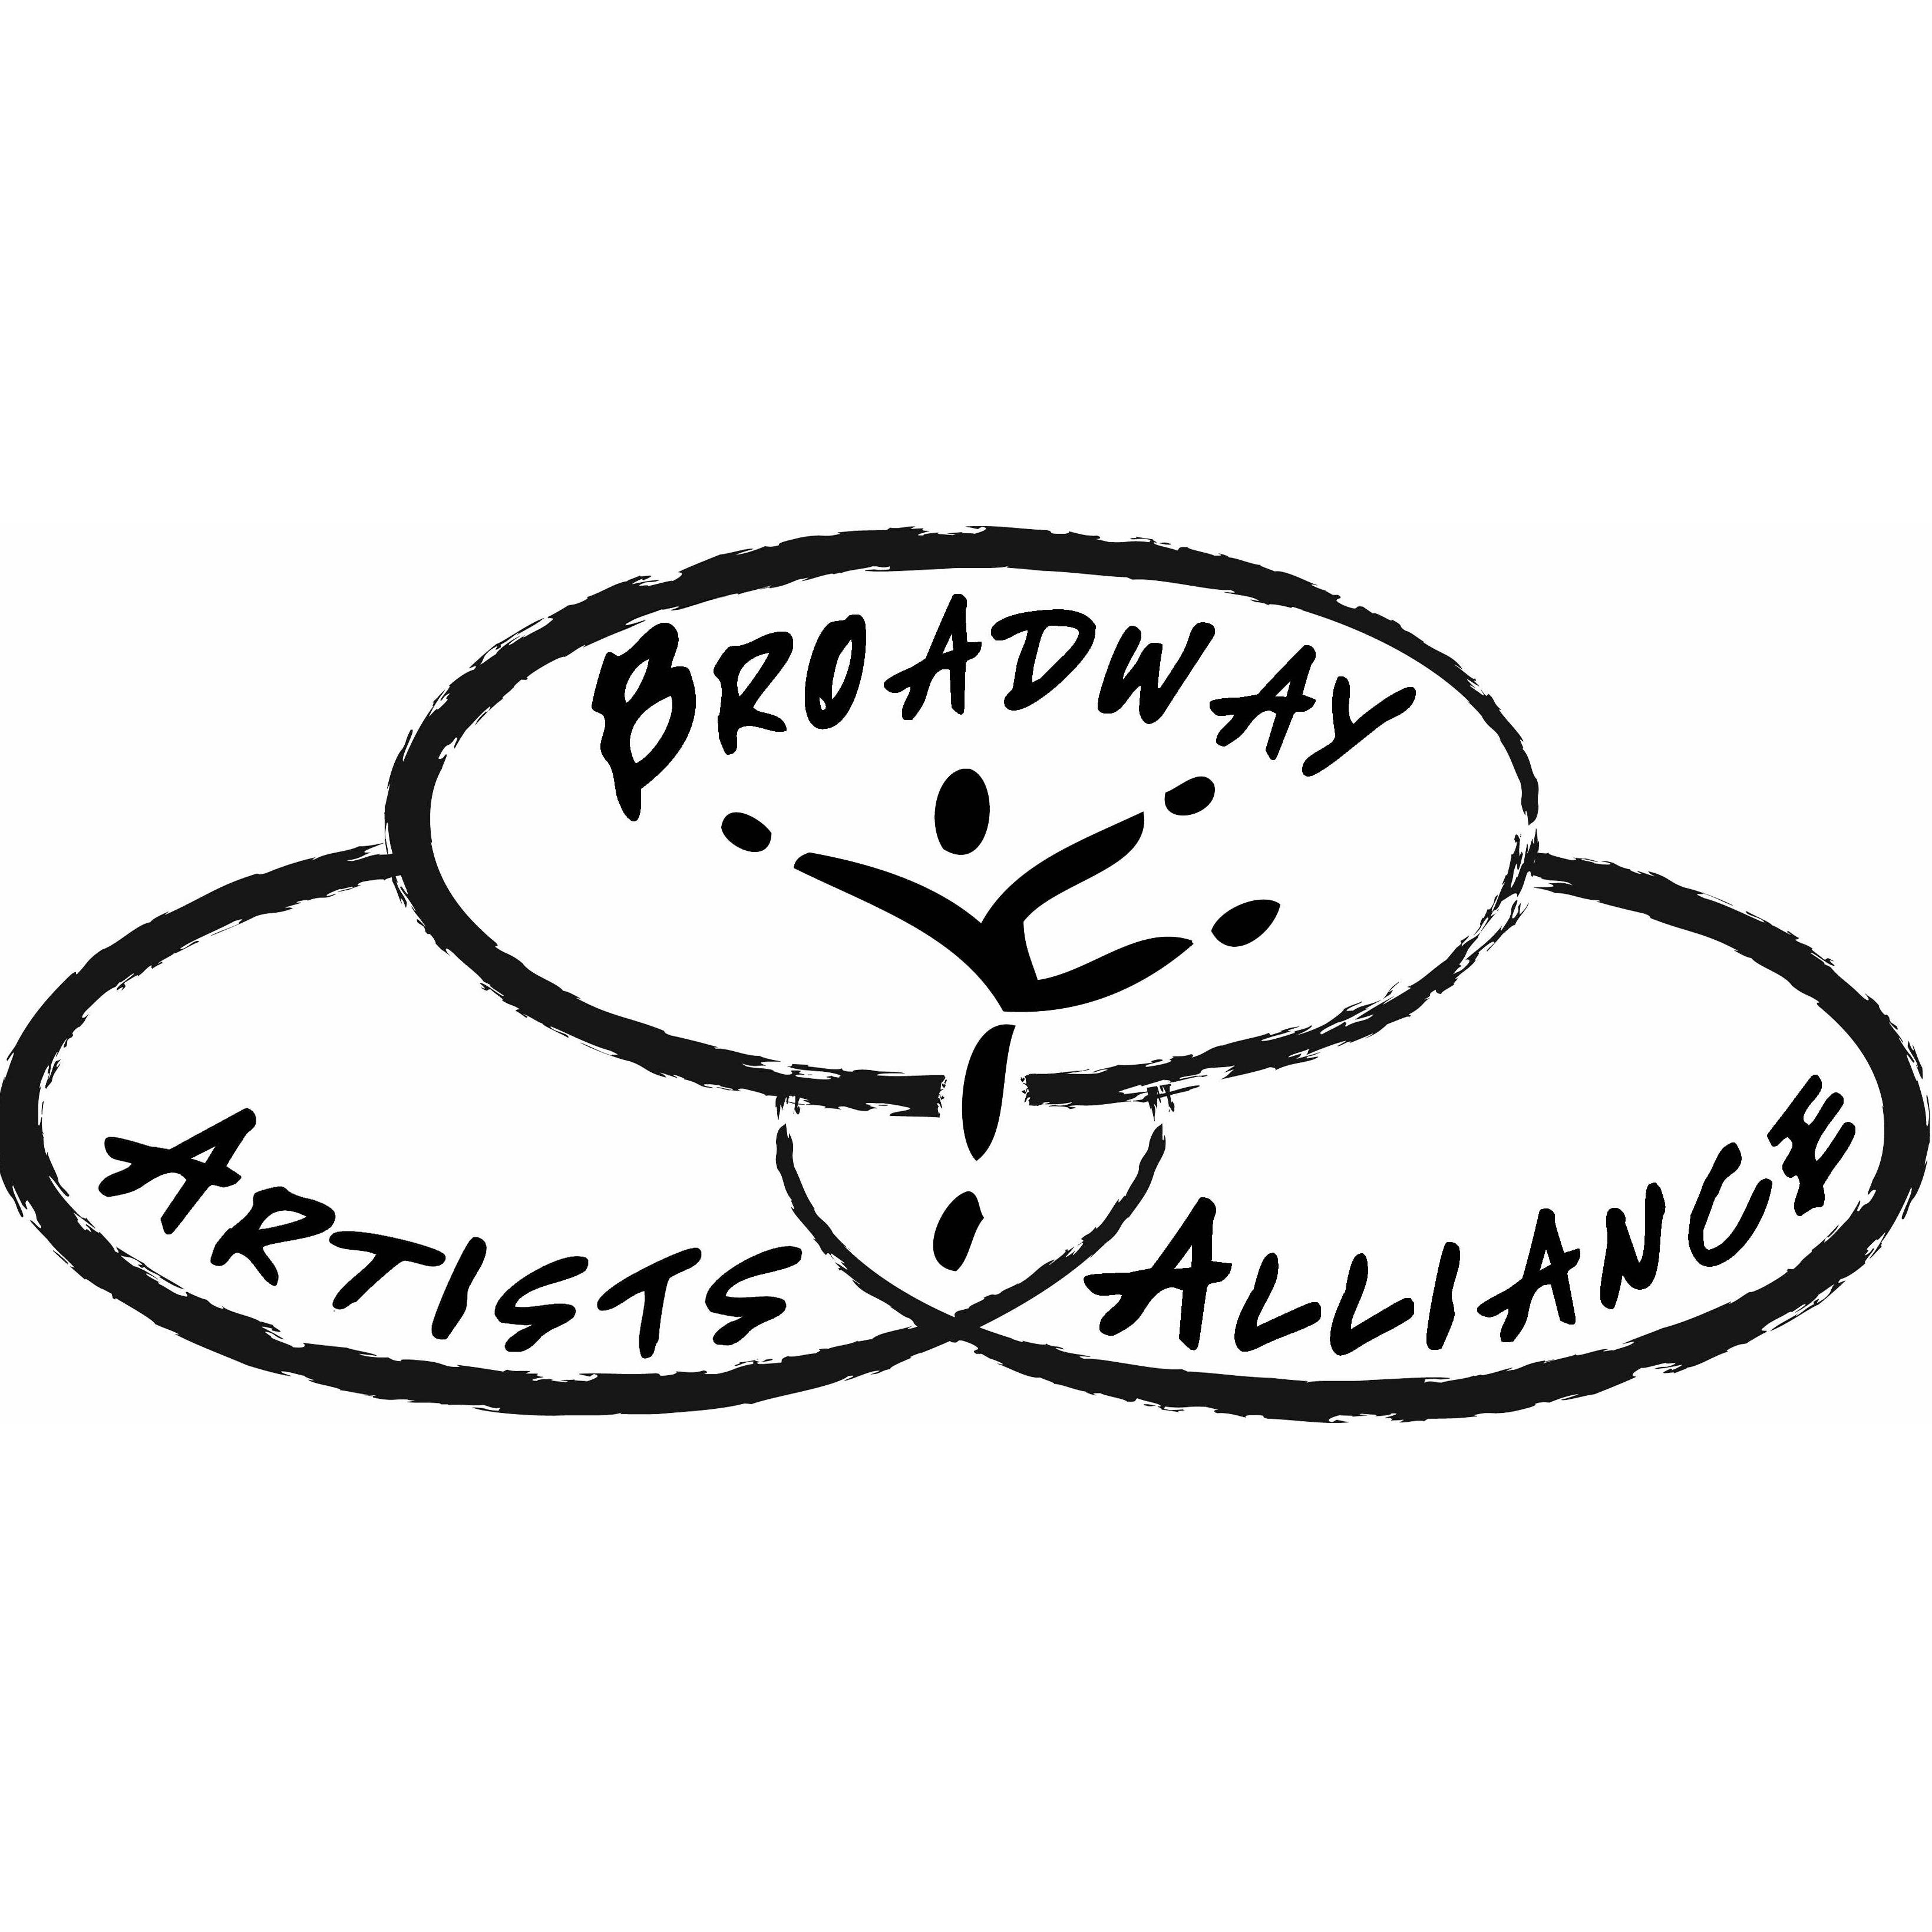 Broadway Artists Alliance of NYC - New York, NY 10018 - (646)709-9918 | ShowMeLocal.com